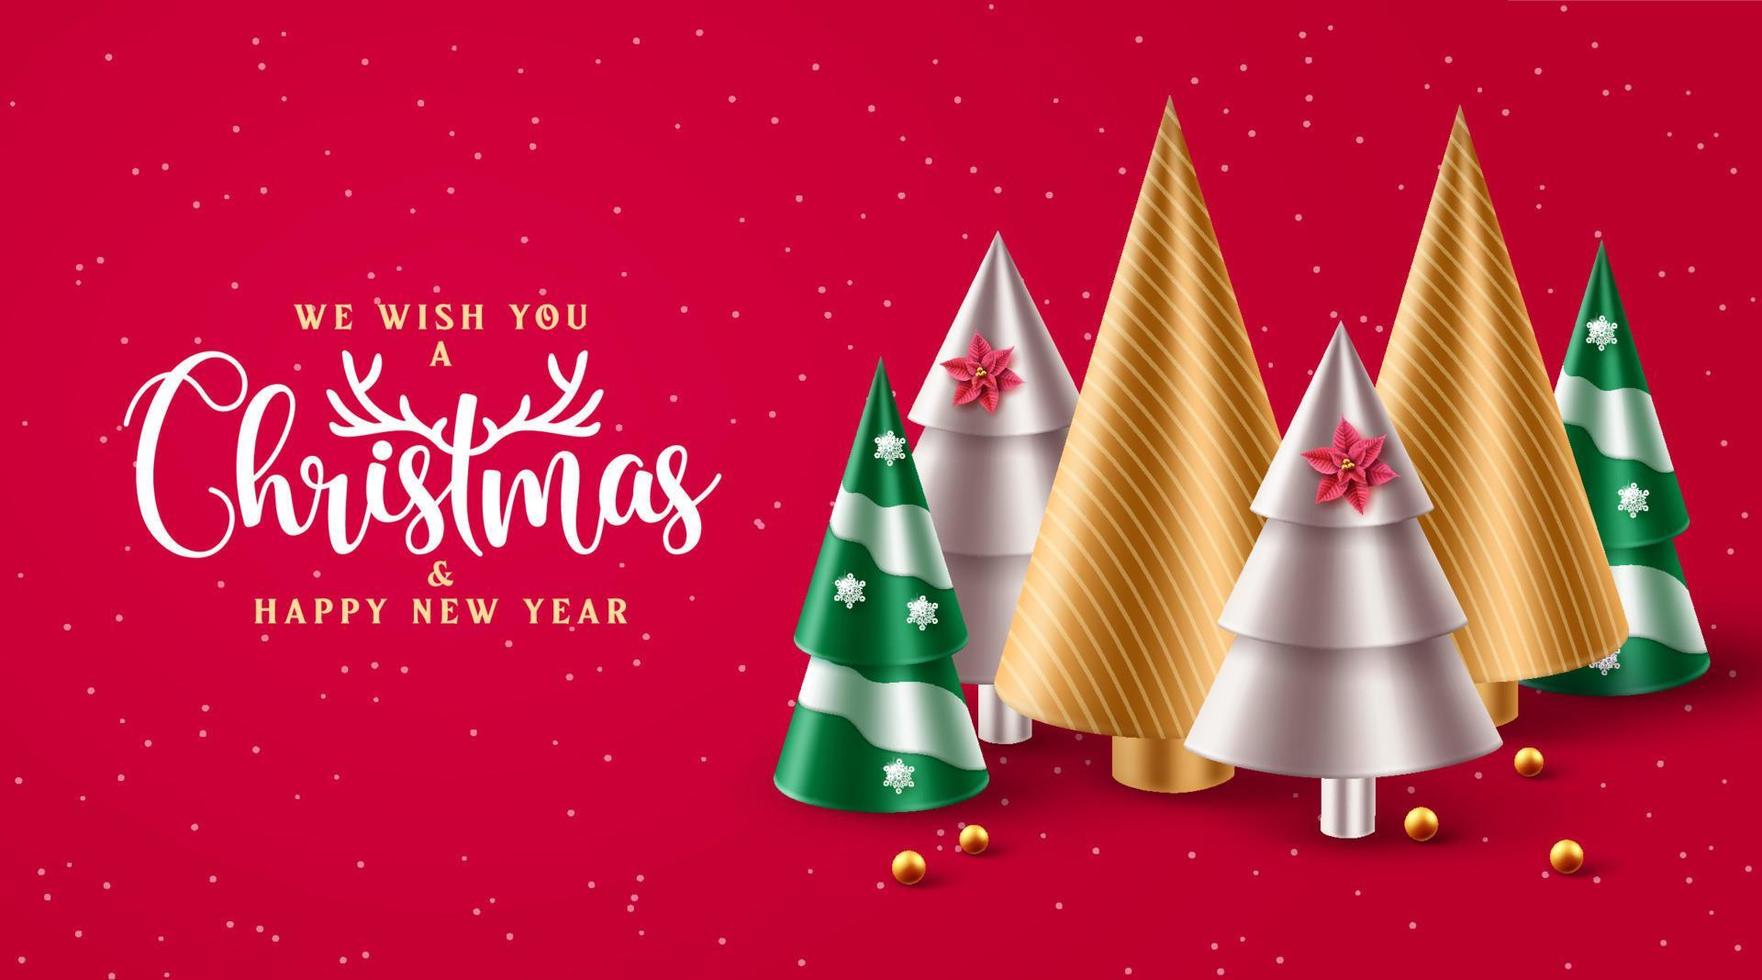 Merry christmas vector background design. Christmas and happy new year greeting text with xmas tree, snowflakes and gold cone elements.